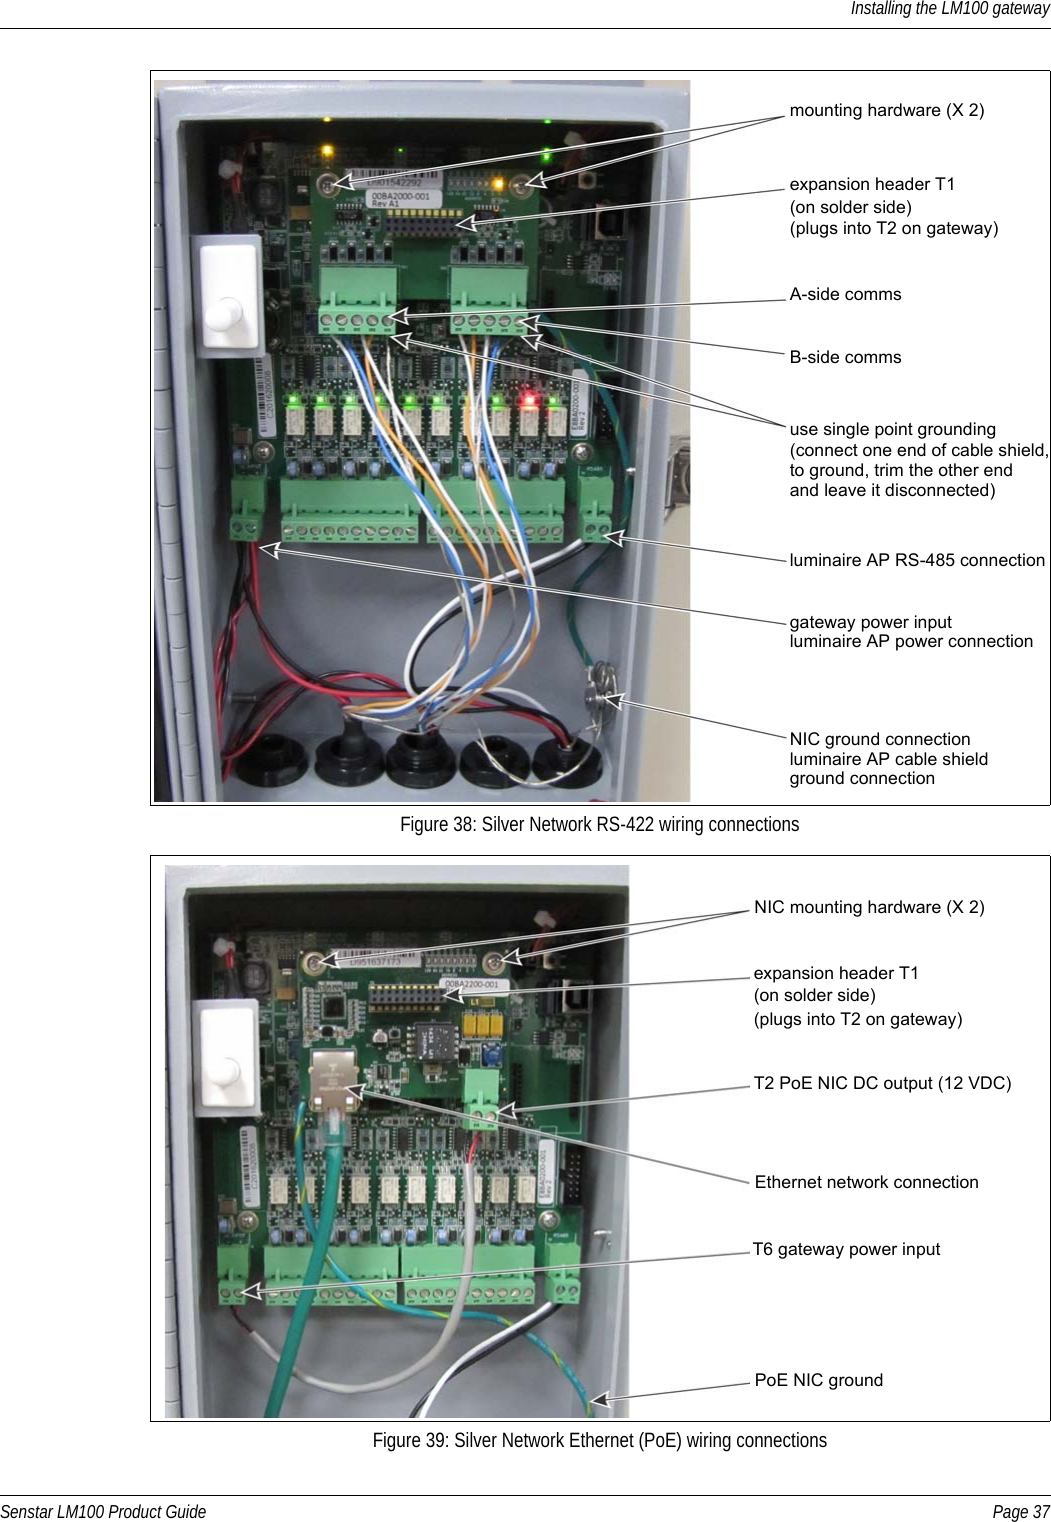 Installing the LM100 gatewaySenstar LM100 Product Guide Page 37Figure 38: Silver Network RS-422 wiring connectionsFigure 39: Silver Network Ethernet (PoE) wiring connectionsexpansion header T1 use single point grounding(plugs into T2 on gateway)mounting hardware (X 2)A-side commsB-side comms(connect one end of cable shield,(on solder side)NIC ground connectionto ground, trim the other endand leave it disconnected)gateway power inputluminaire AP power connectionluminaire AP RS-485 connectionluminaire AP cable shield ground connectionexpansion header T1 T6 gateway power input(plugs into T2 on gateway)NIC mounting hardware (X 2)T2 PoE NIC DC output (12 VDC)Ethernet network connection(on solder side)PoE NIC ground